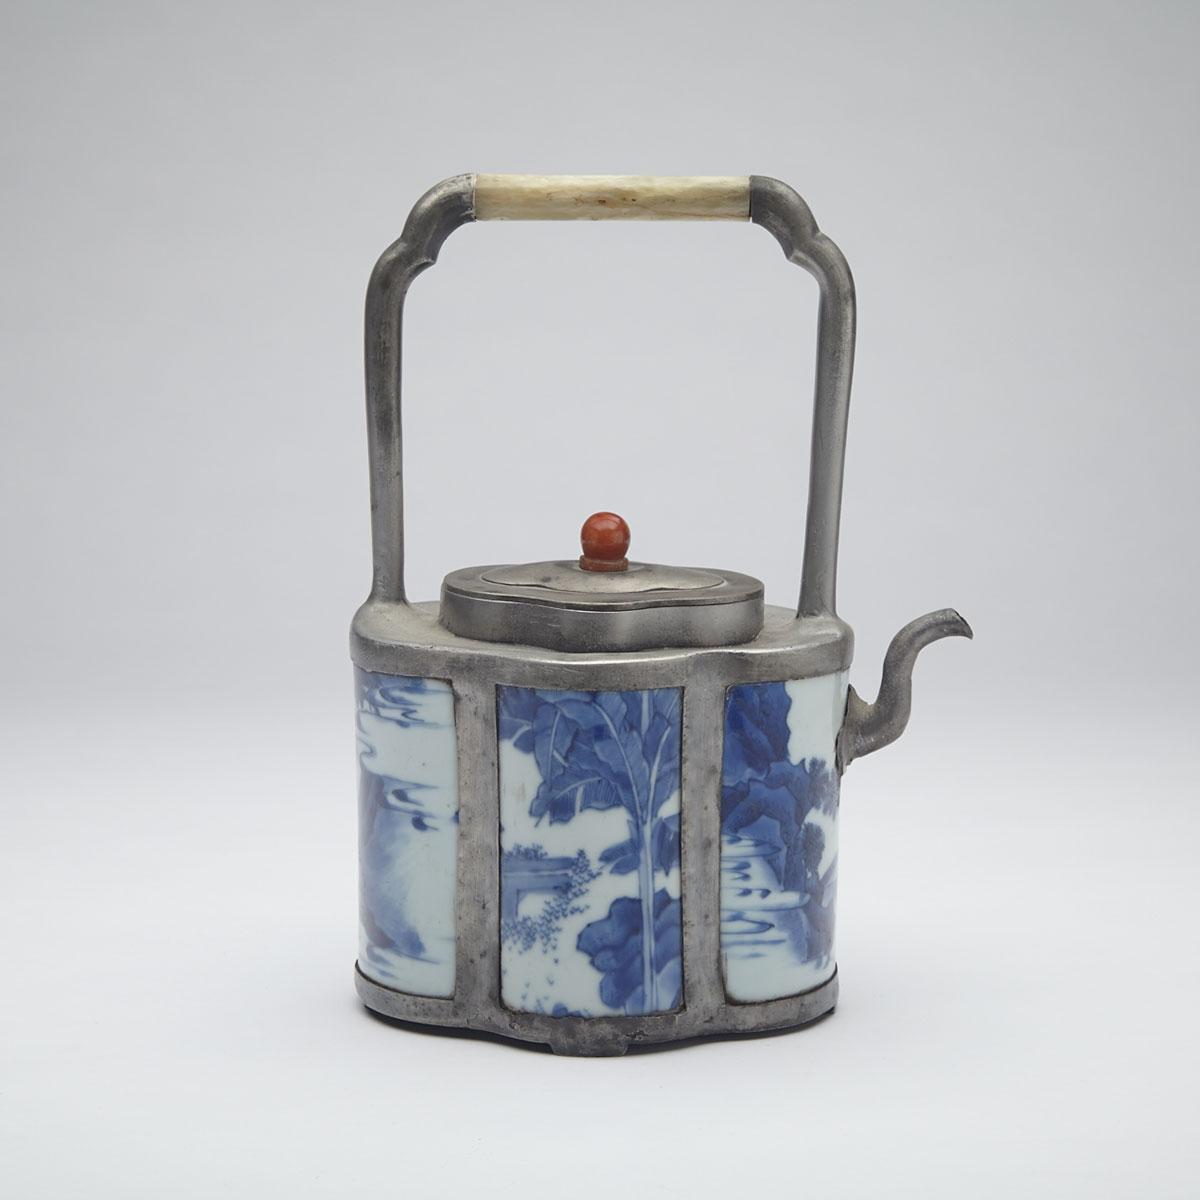 Blue and White Porcelain and Pewter Teapot, 17th Century